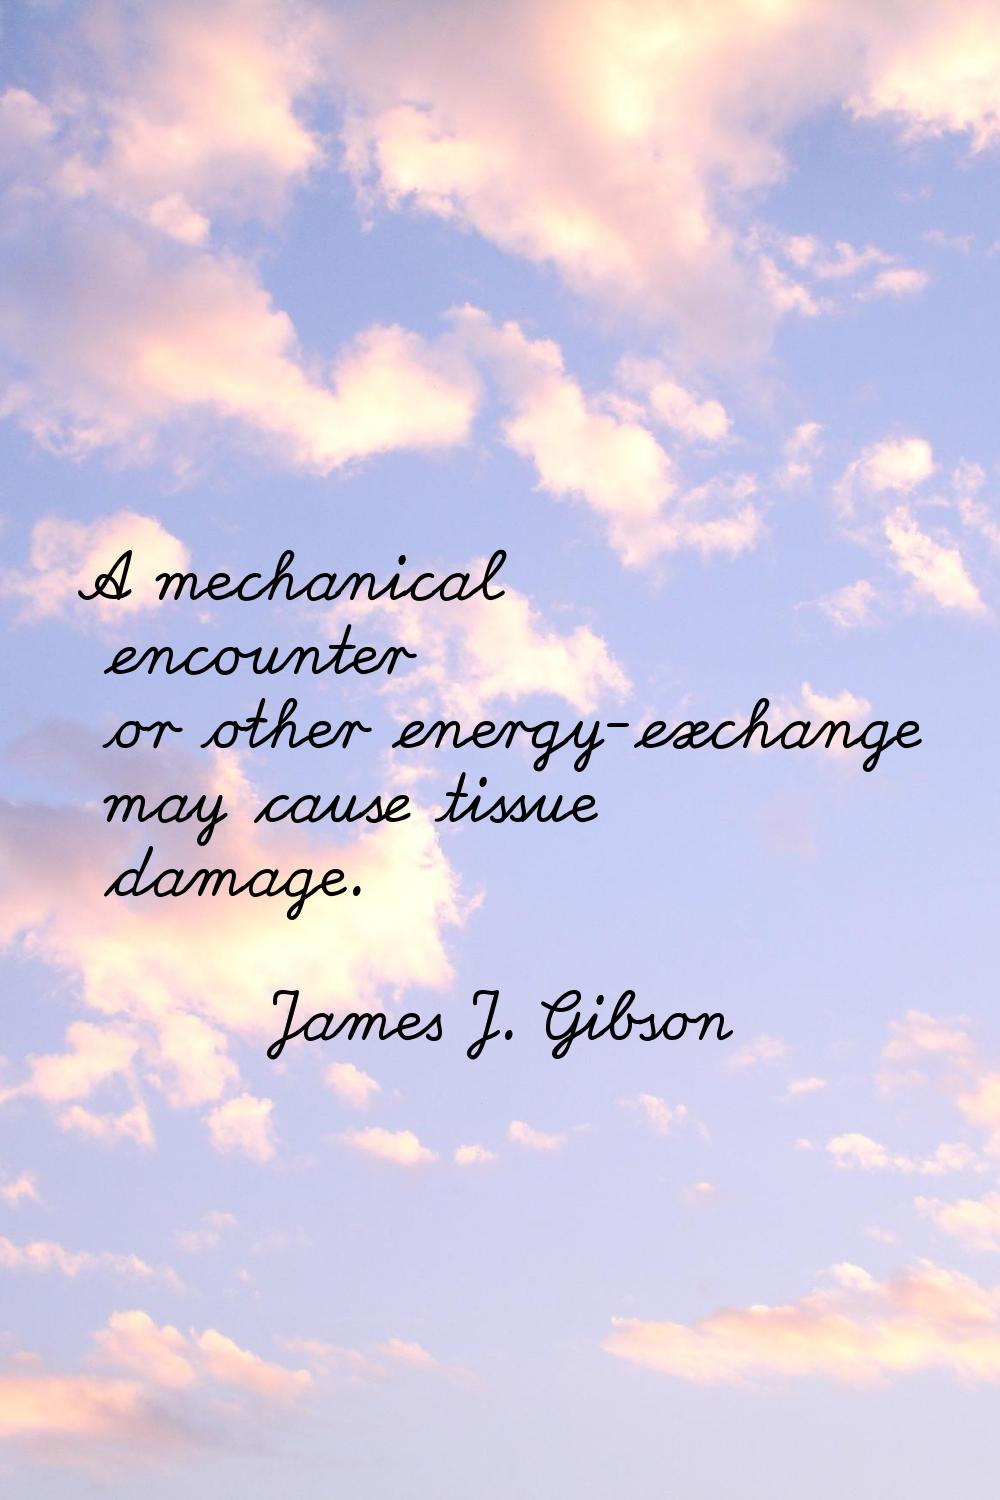 A mechanical encounter or other energy-exchange may cause tissue damage.